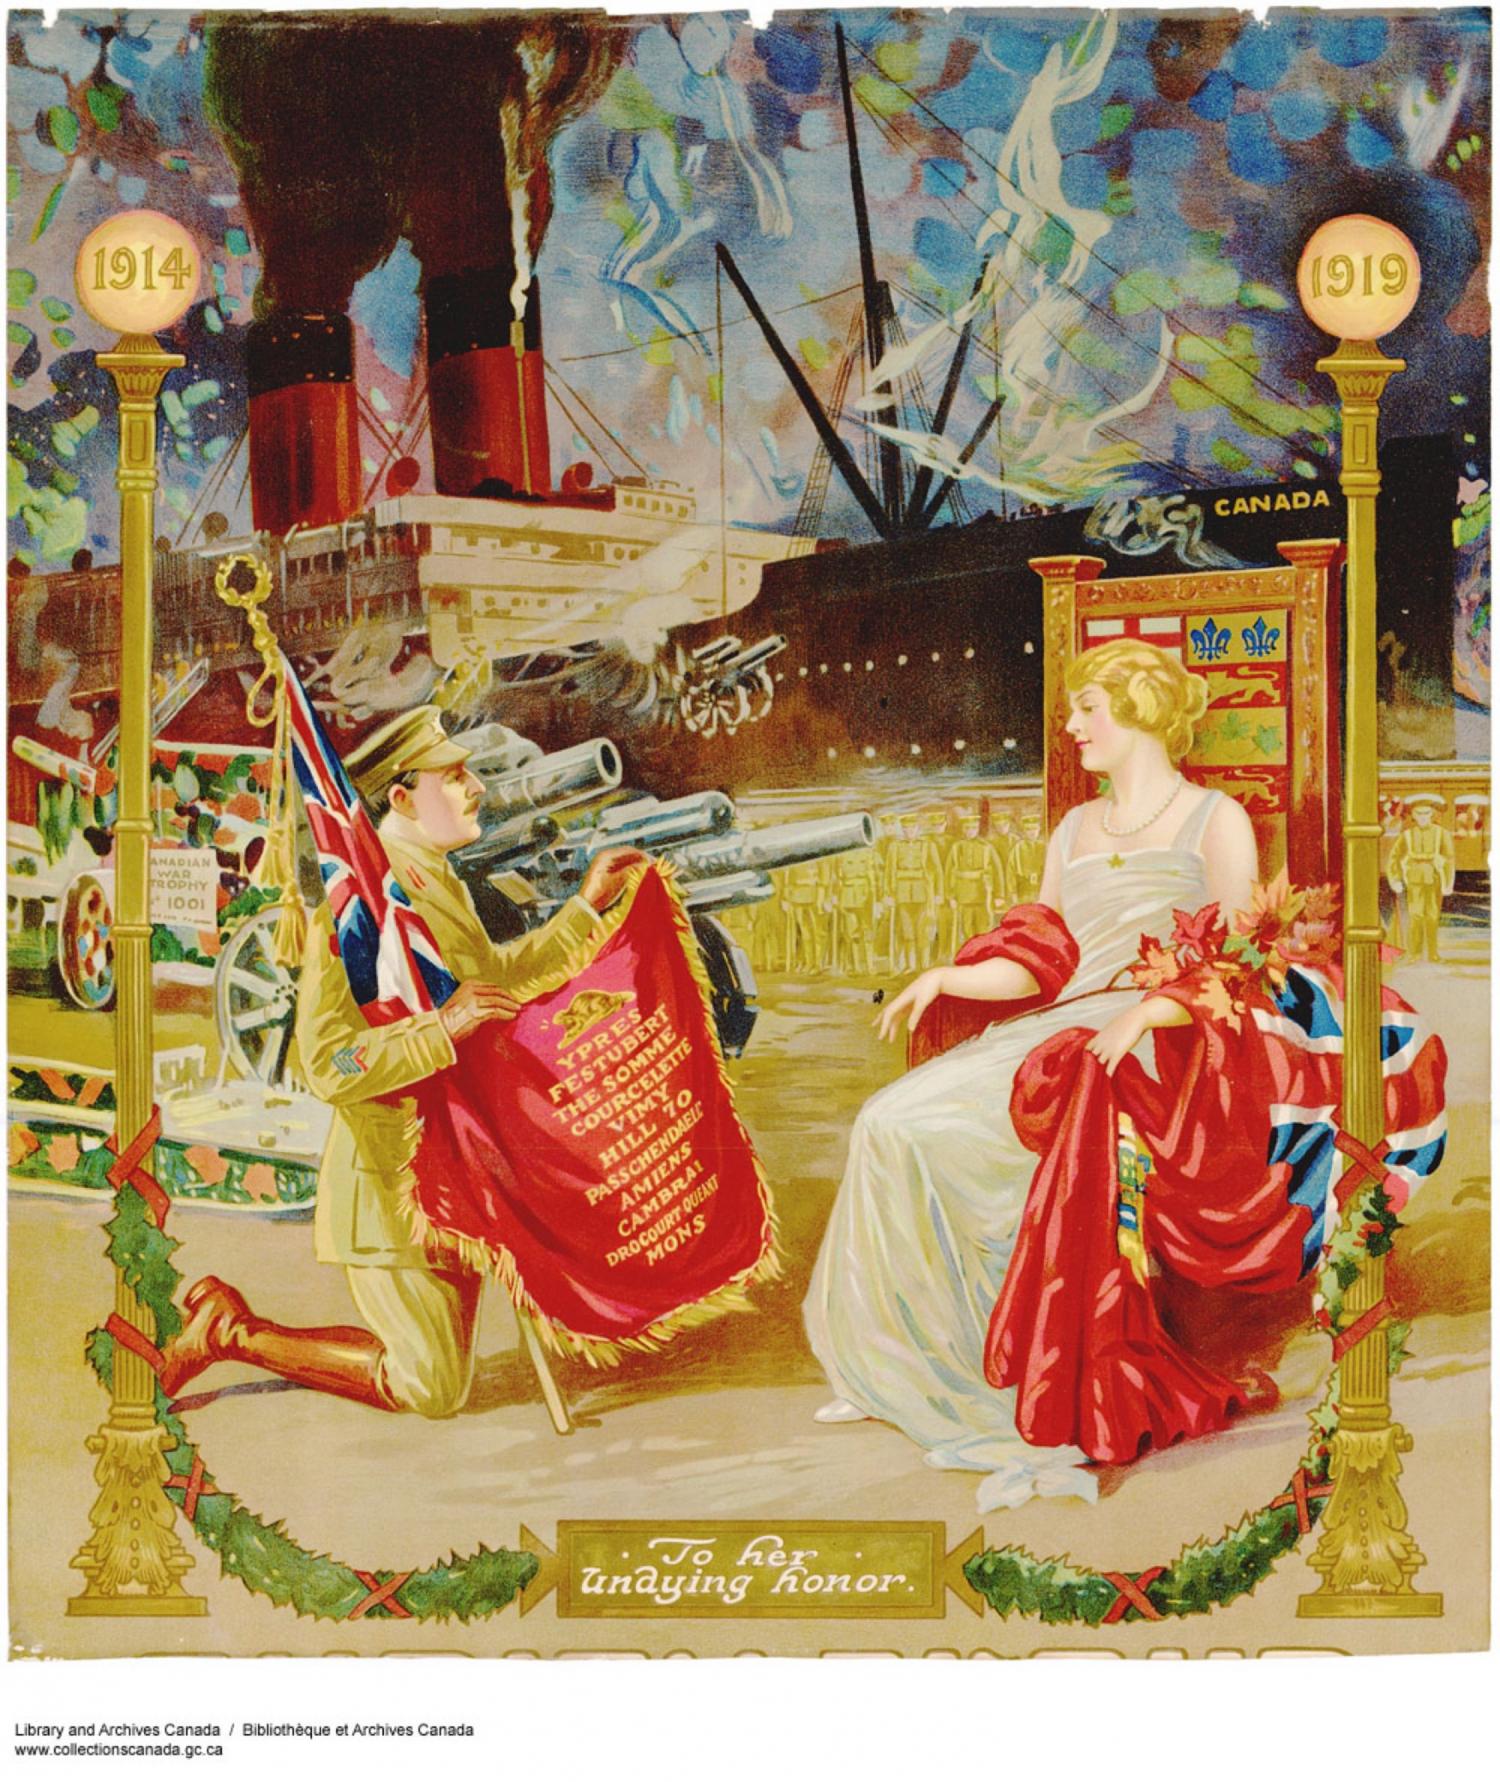 A painting entitled "To her undying honor" [sic]. A soldier presents a flag with the names of the major battles of World War I on it to a personification of Canada]